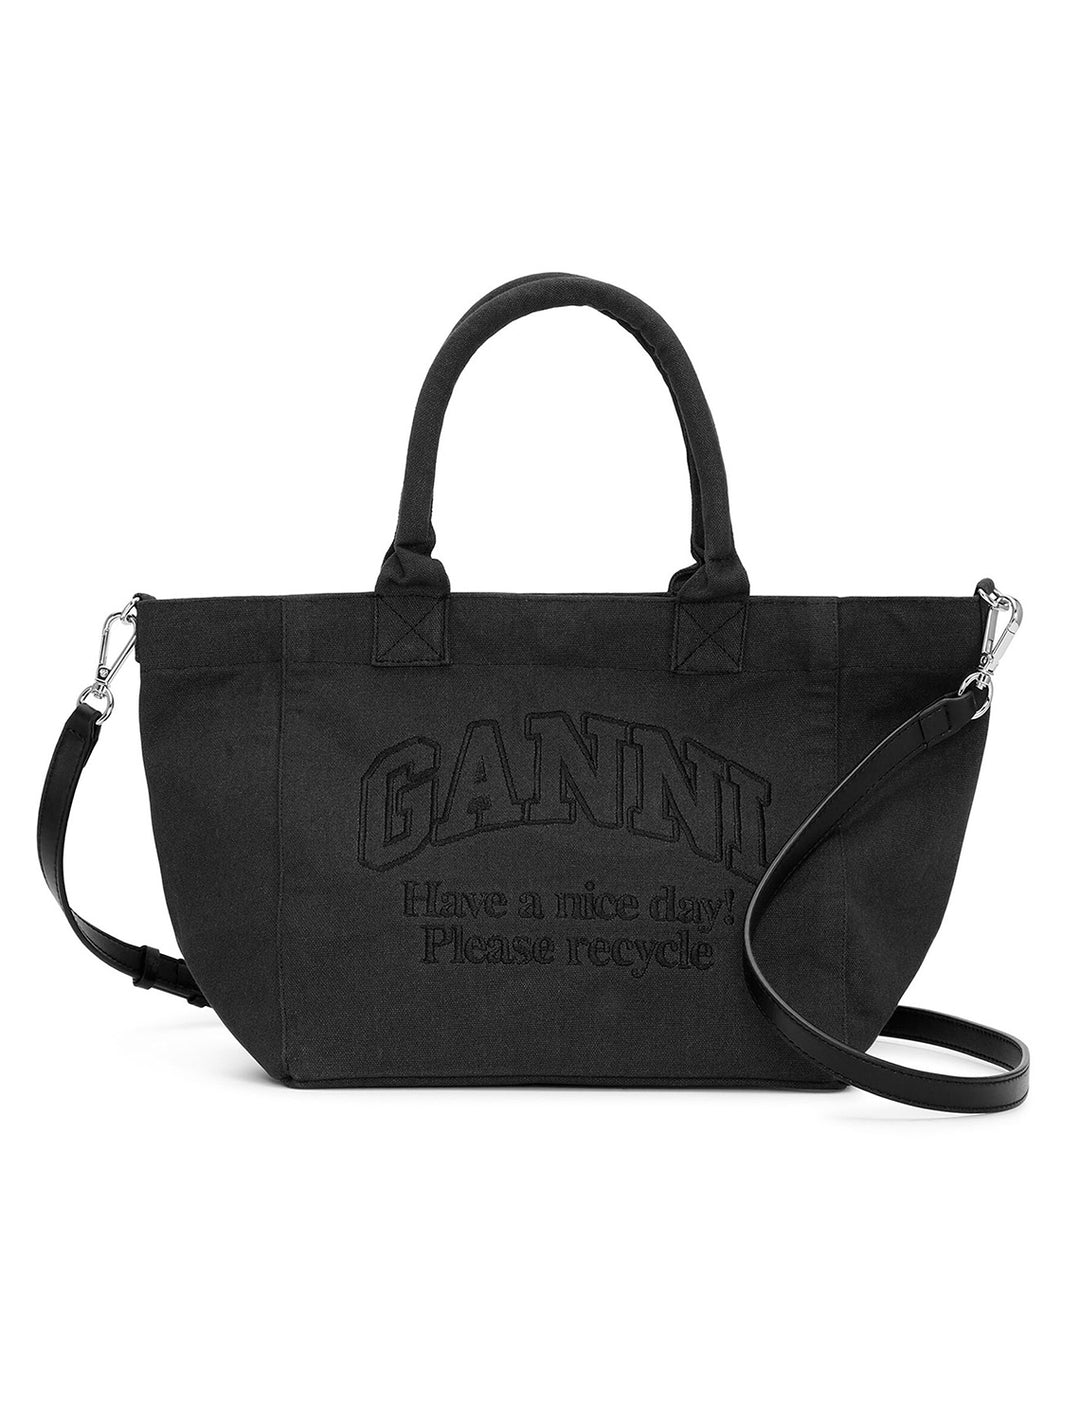 Front view of GANNI's small easy shopper in black.